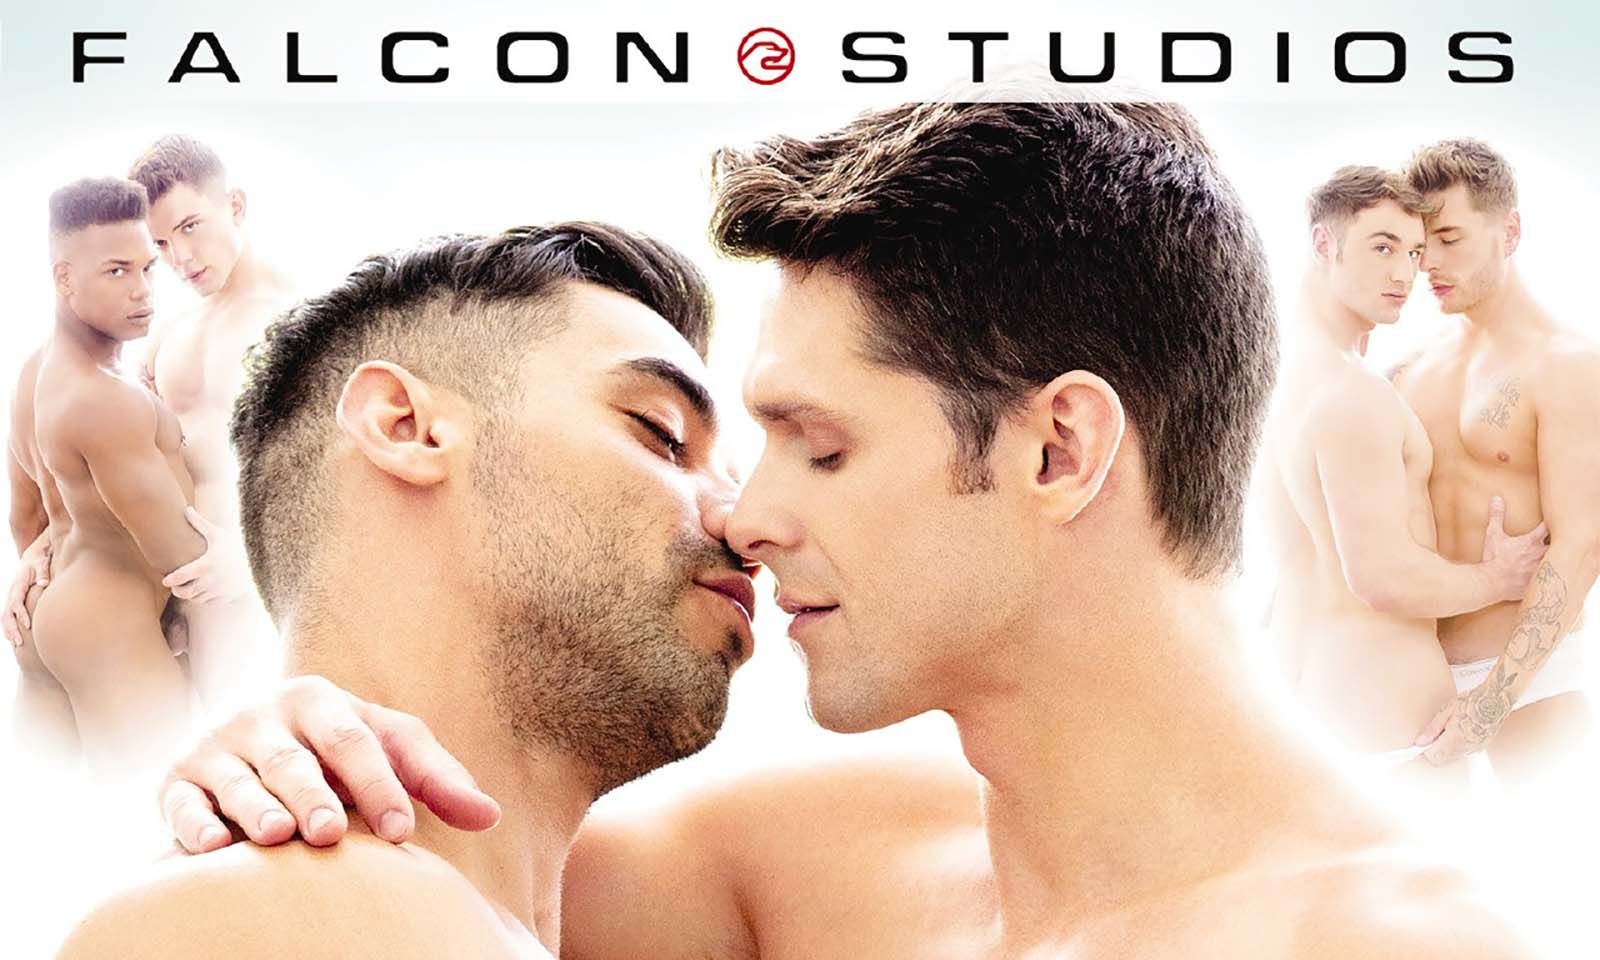 Falcon Studios Hits Milestone 300th Release 'Afternoon Affairs'